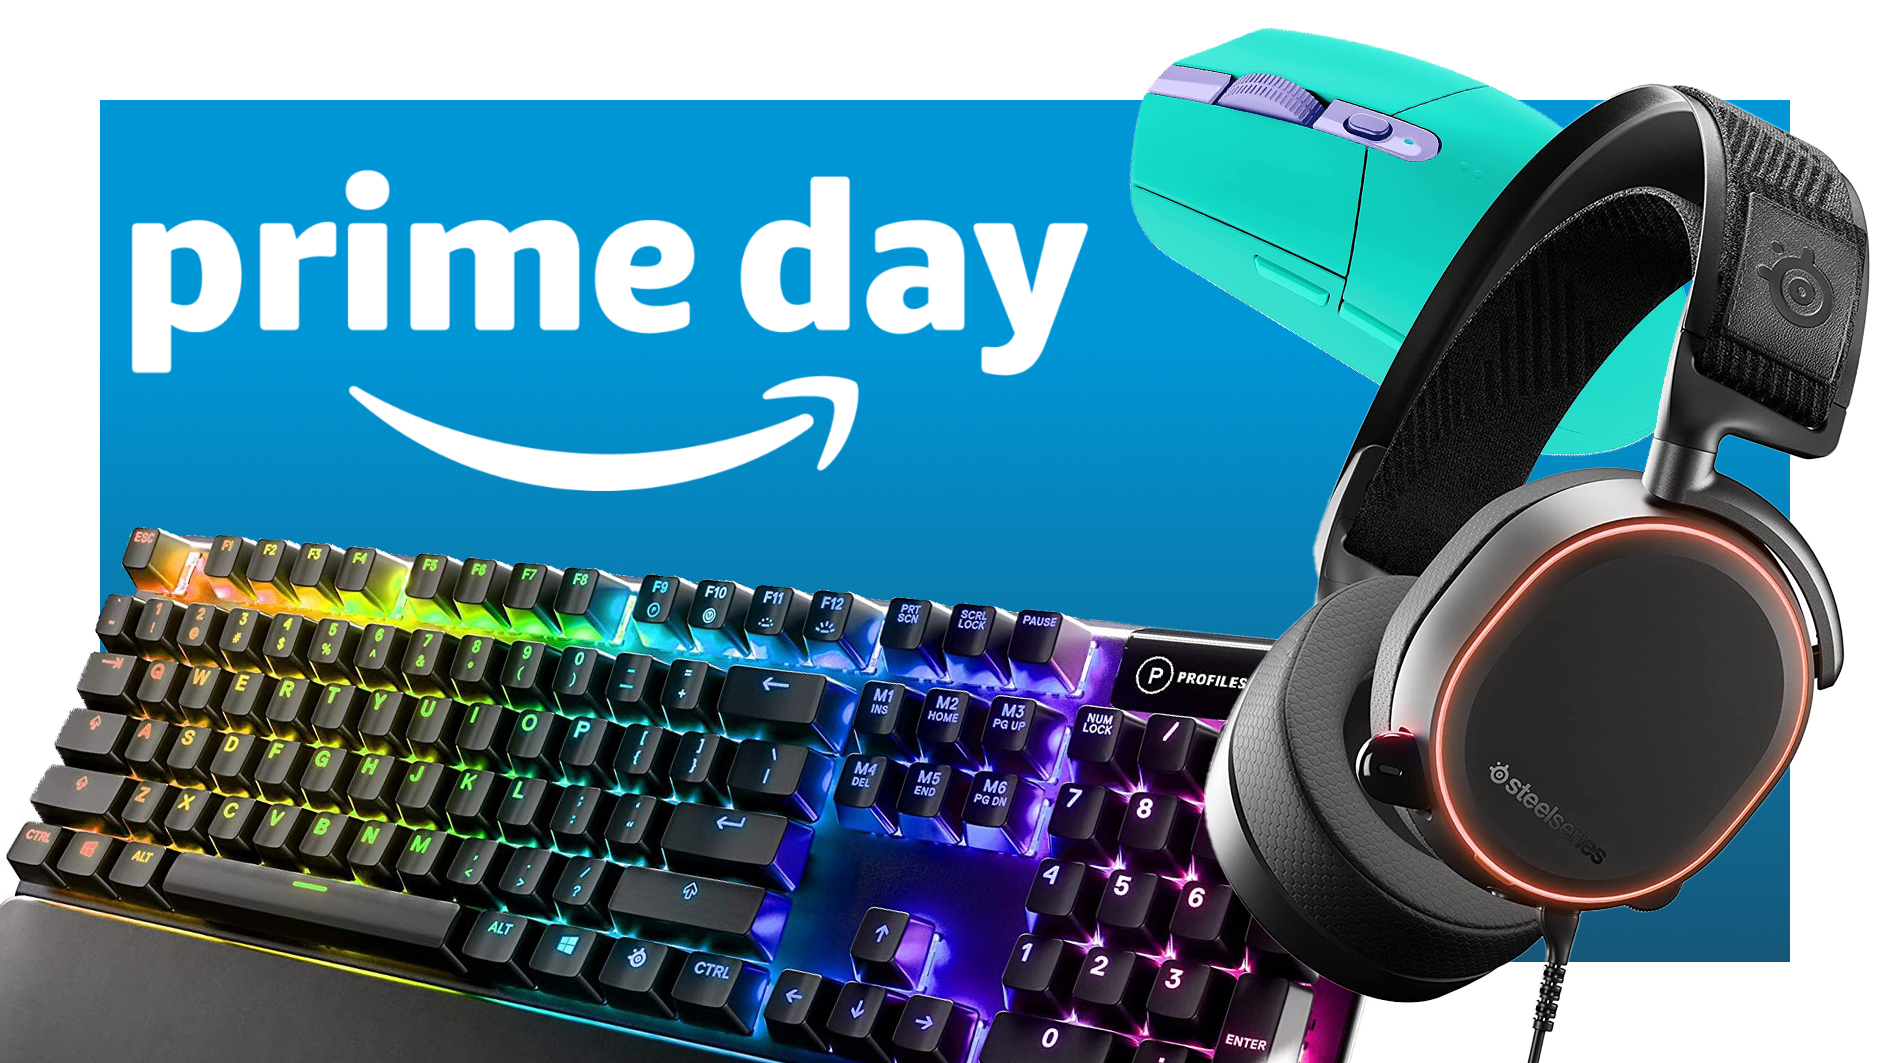  Complete your PC gaming setup with these Prime Day mouse, keyboard, and headset deals 